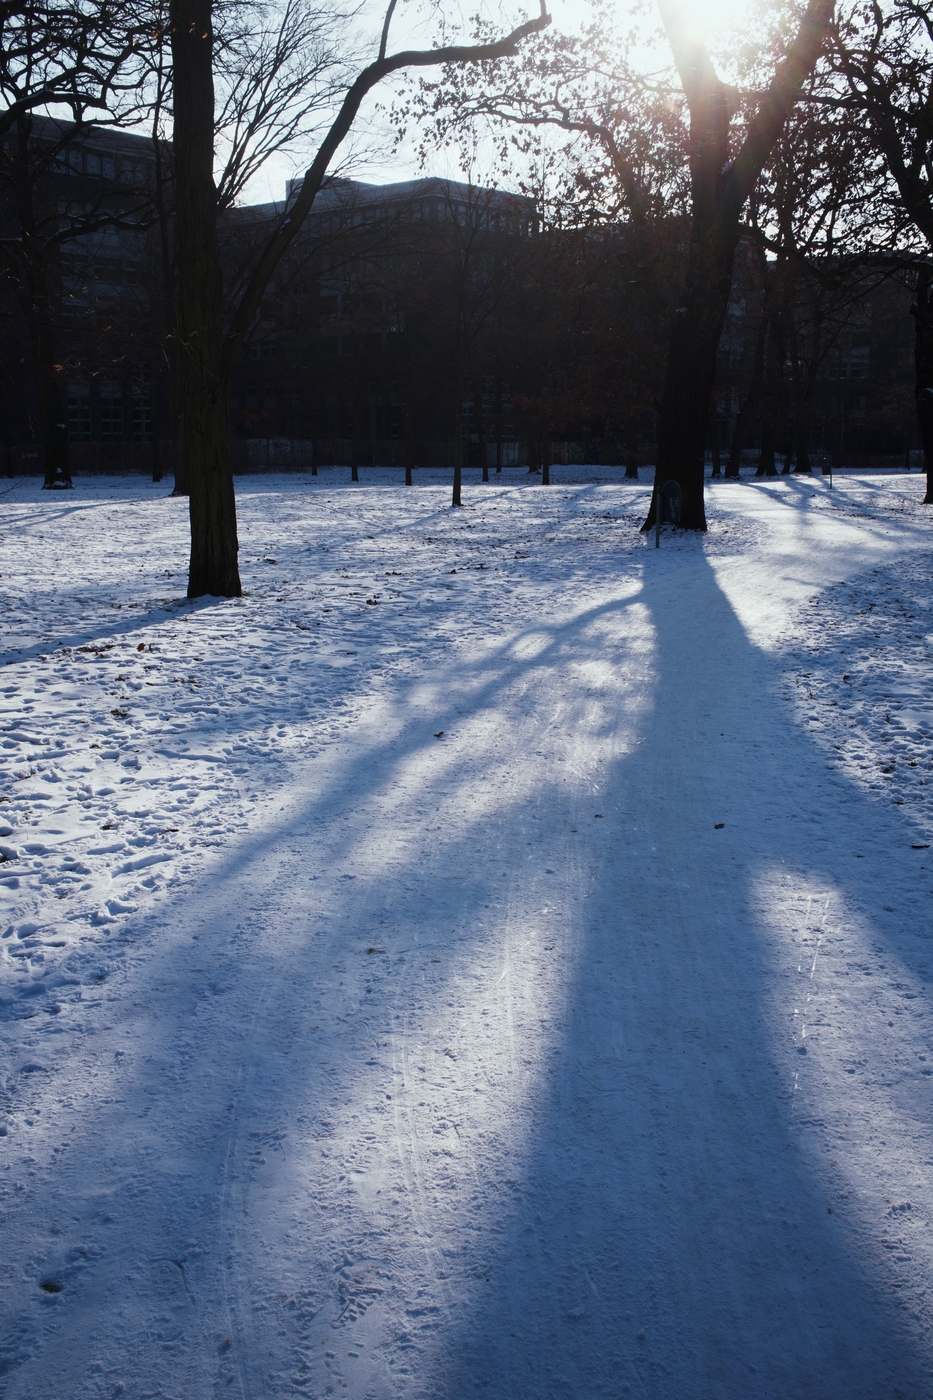 The shadows of trees on the snow in a park